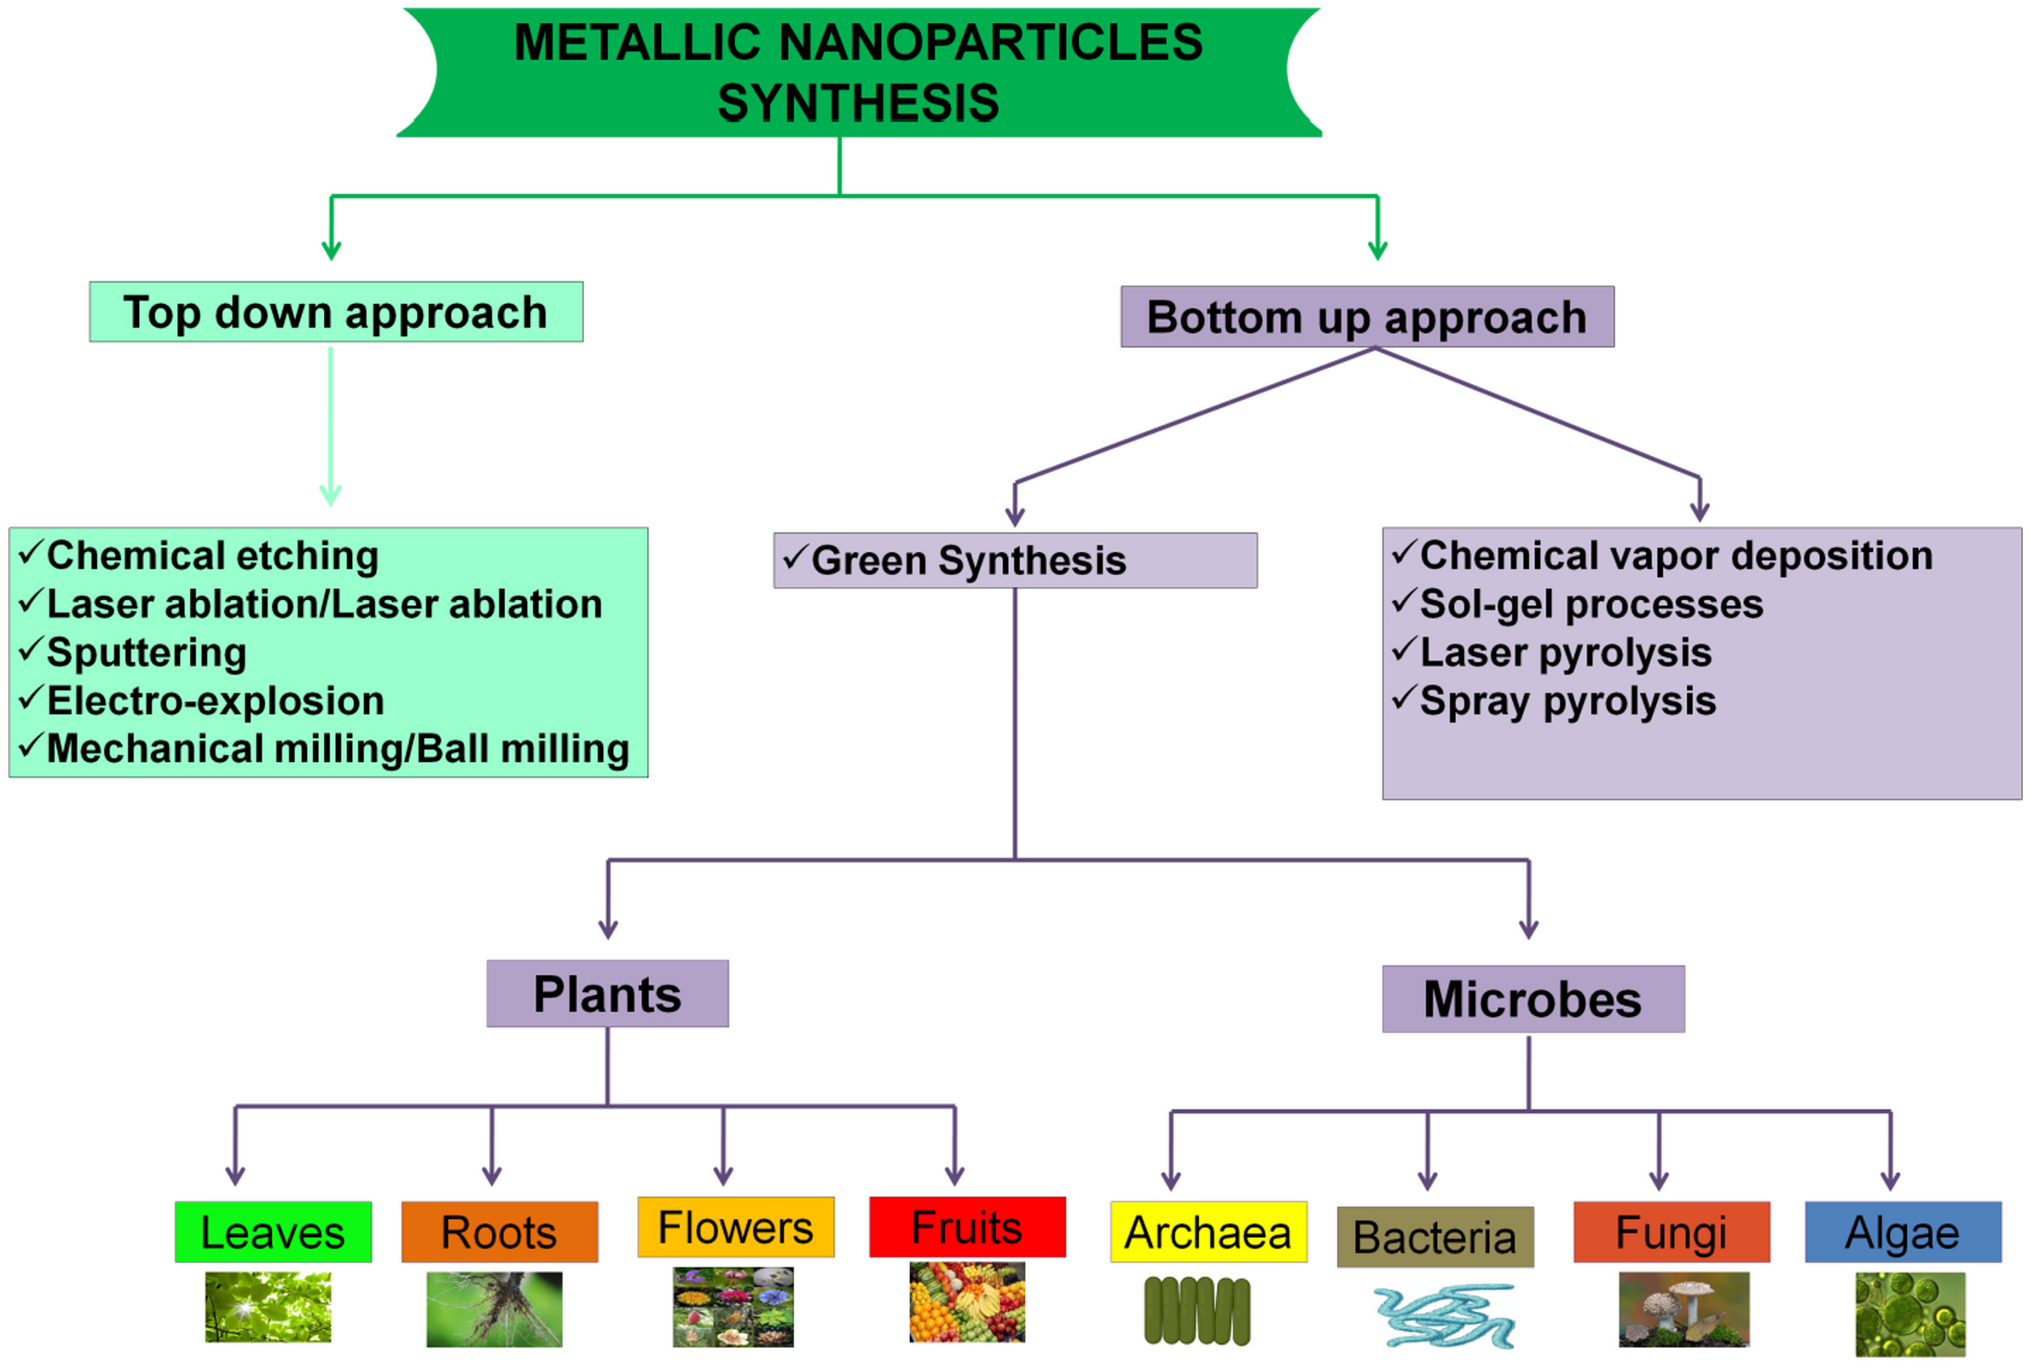 Microbial nanotechnology for agriculture, food, and environmental sustainability: Current status and future perspective